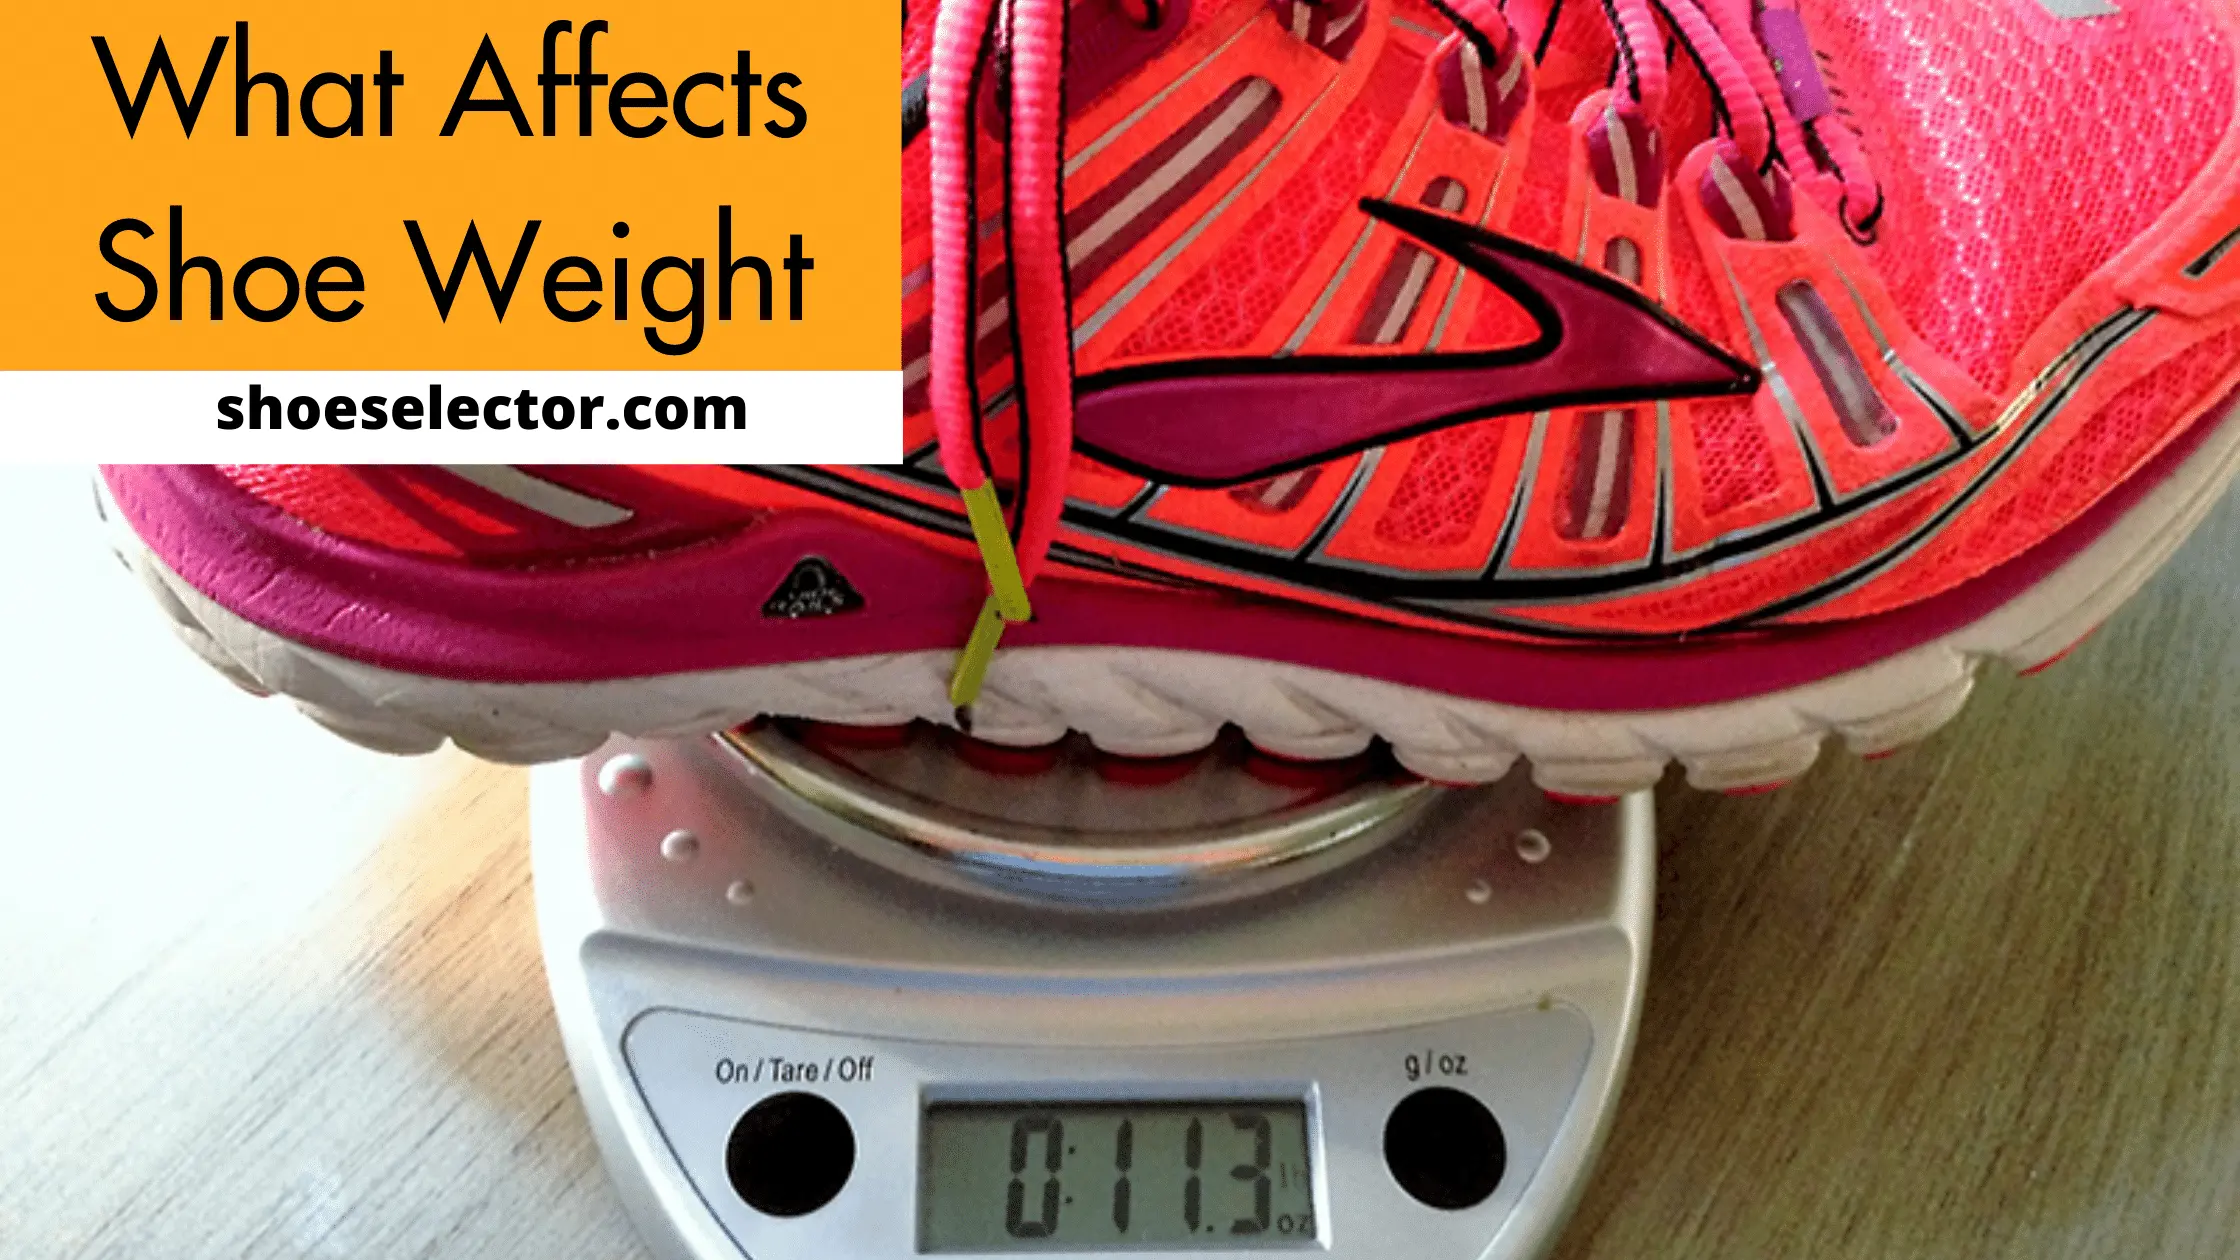 What Affects Shoe Weight?